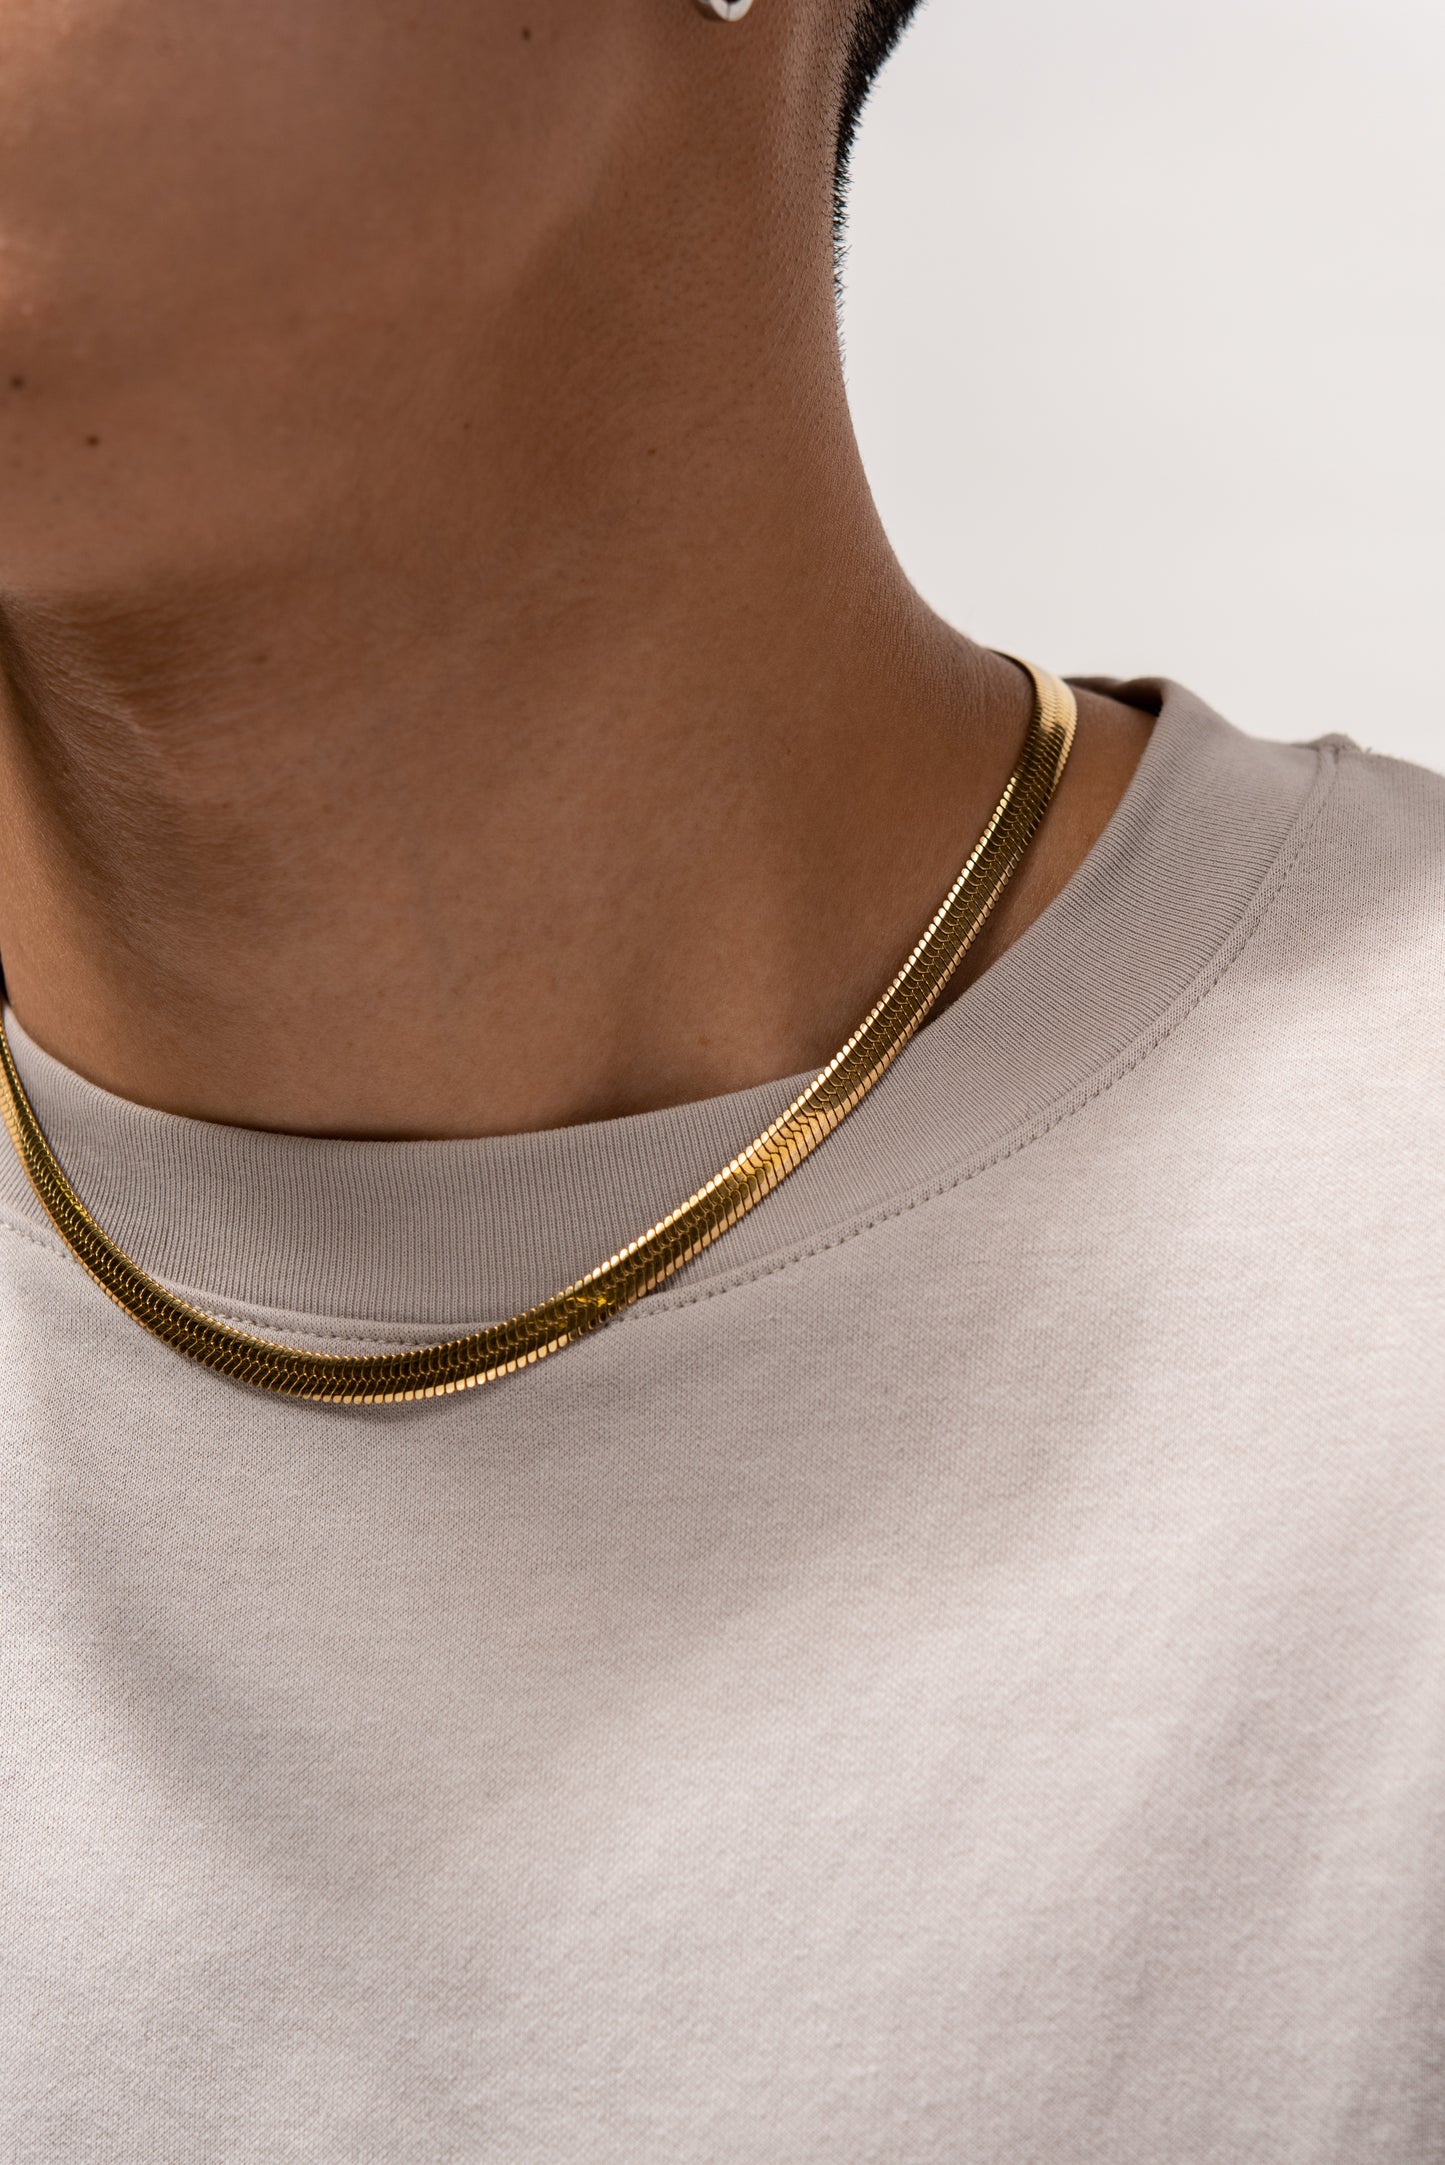 Stainless Steel Herringbone Chain Necklace - Gold